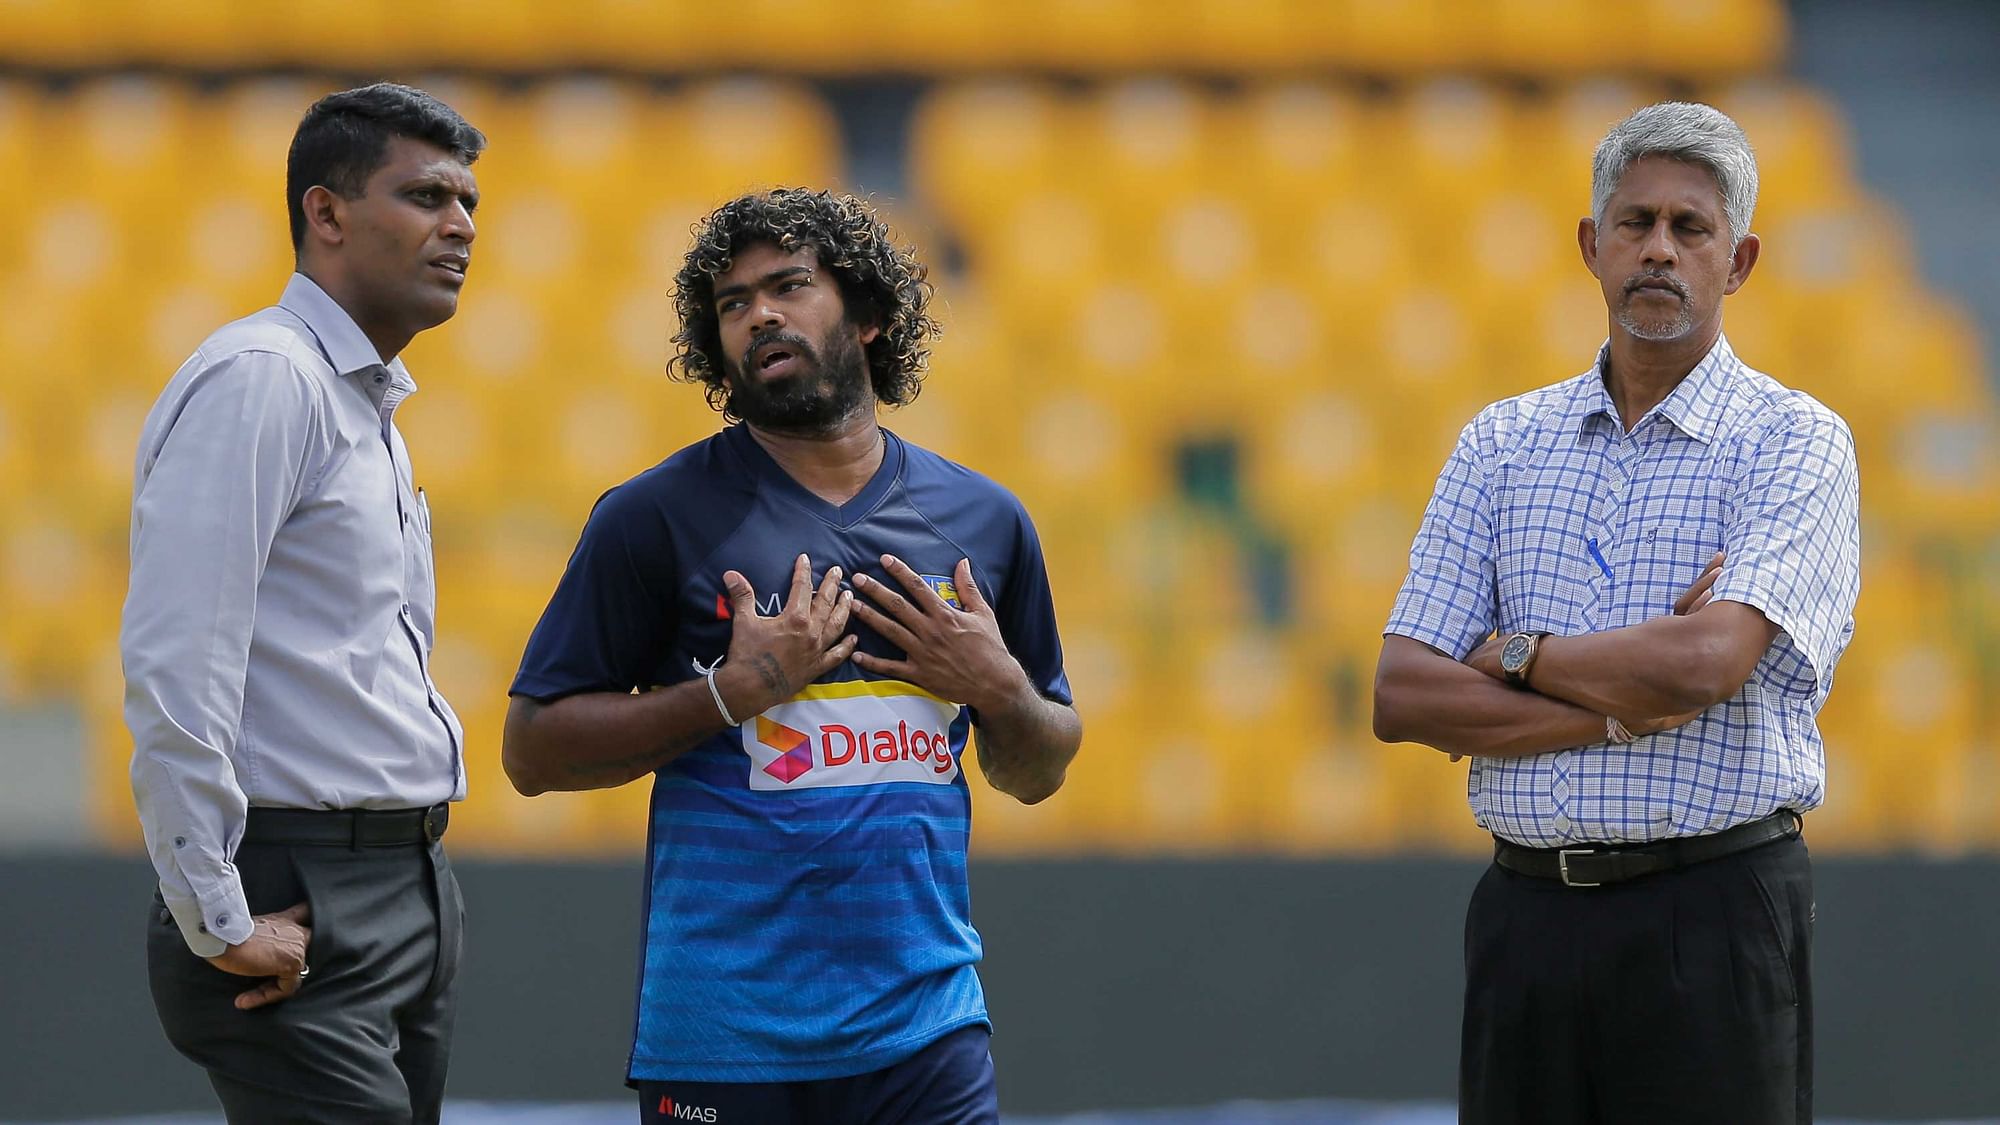 Sri Lanka skipper Lasith Malinga has blamed himself for their drubbing in the T20 Internationals against India but admitted that leading an inexperienced side is affecting his performance.